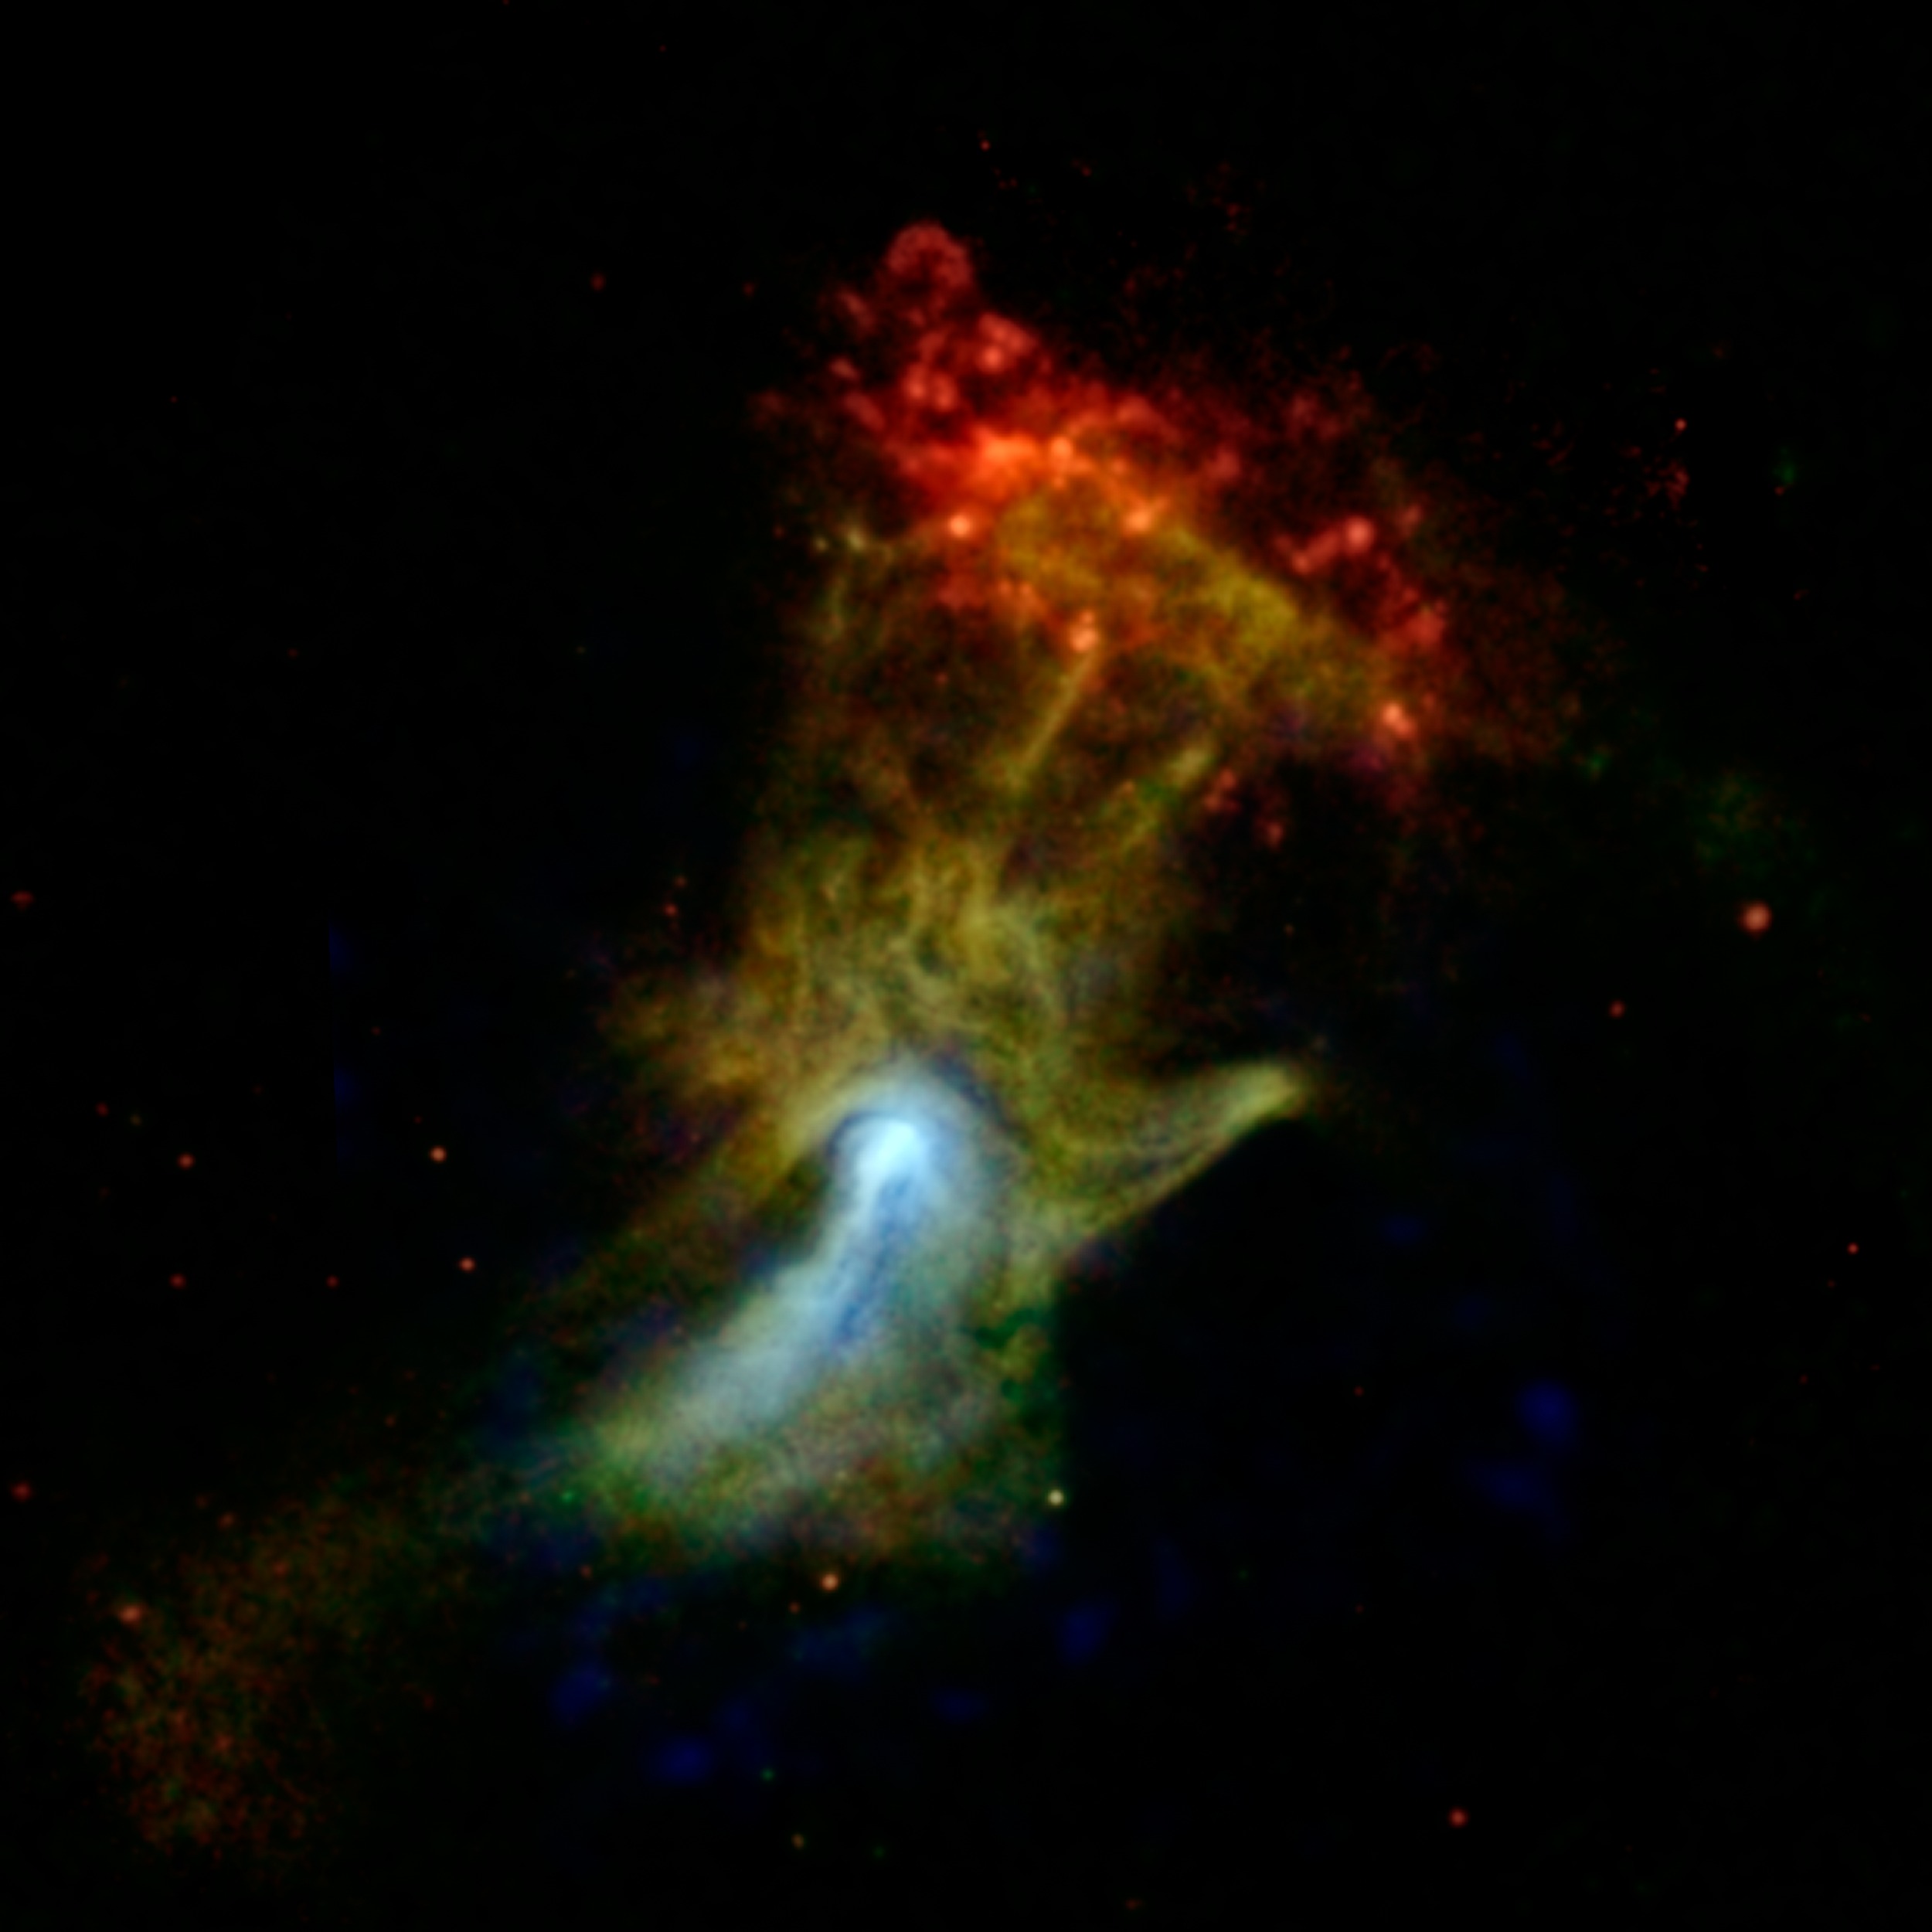 X-ray View of 'Hand of God'